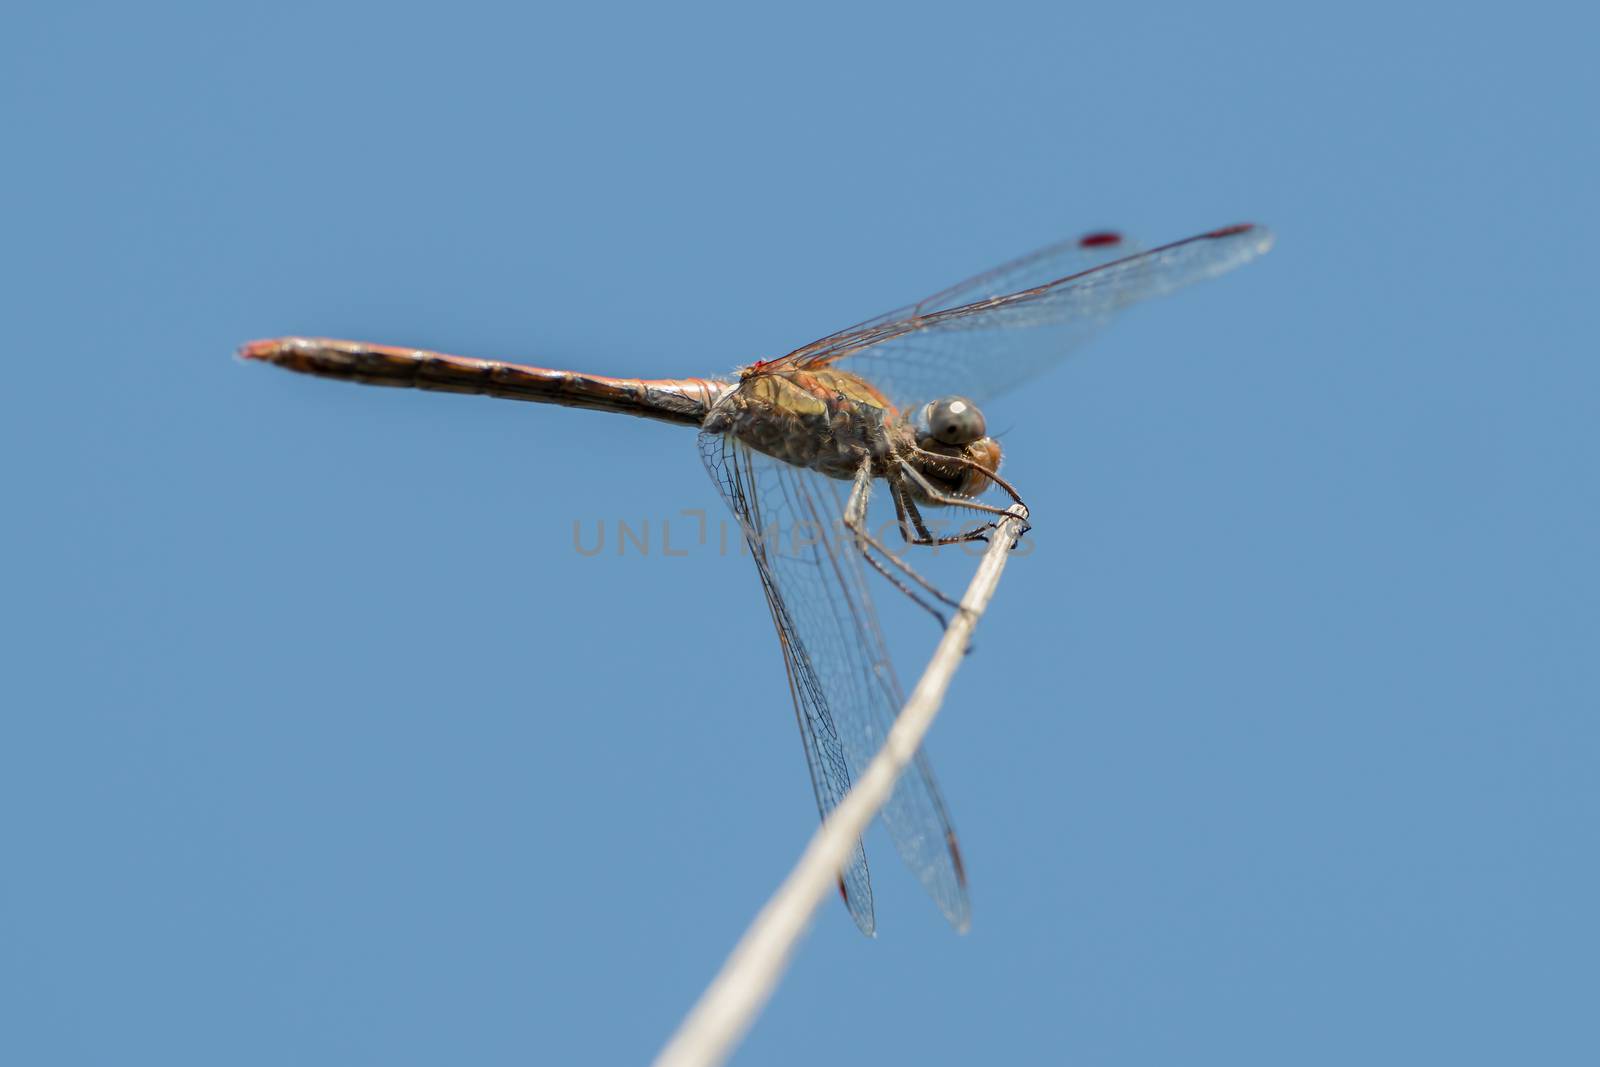 Dragonfly in the wild on a branch by sandra_fotodesign